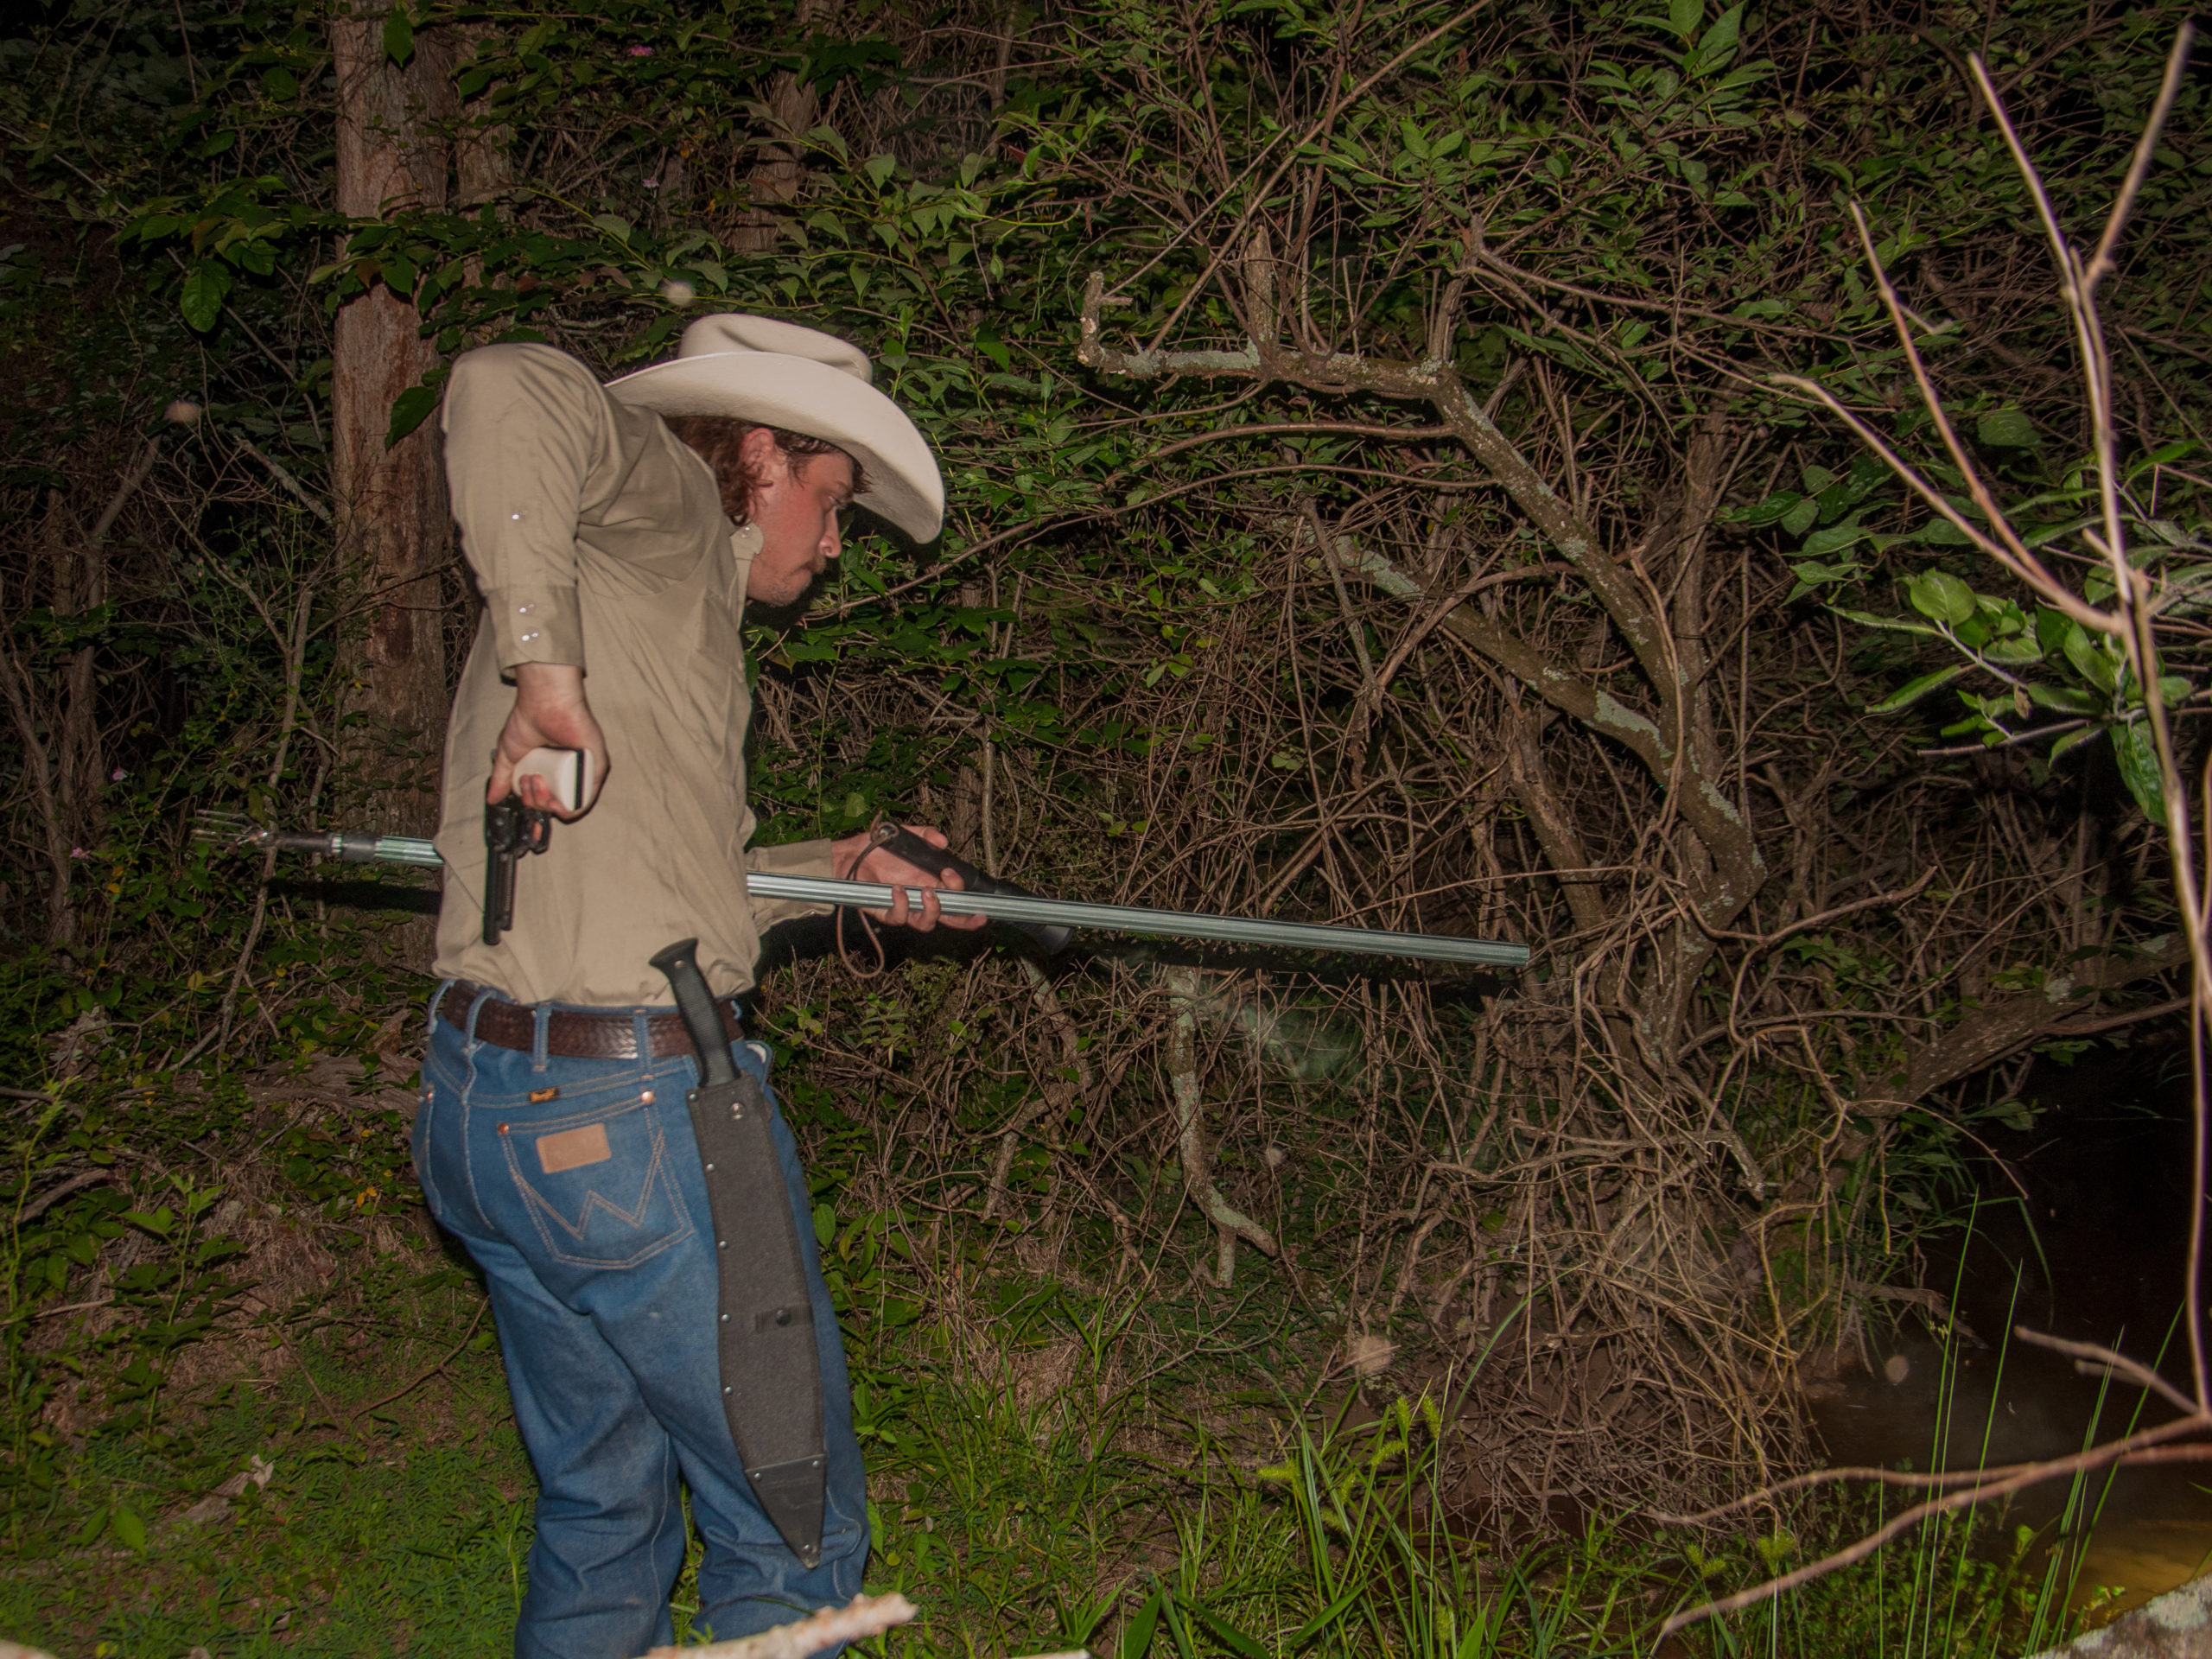 In the woods, a man wearing a tan shirt, jeans, and cowboy hat holds a long pronged metal spear in his left hand and pulls a gun out from the back of his pants with his right hand. A long machete in a case hangs from his belt.